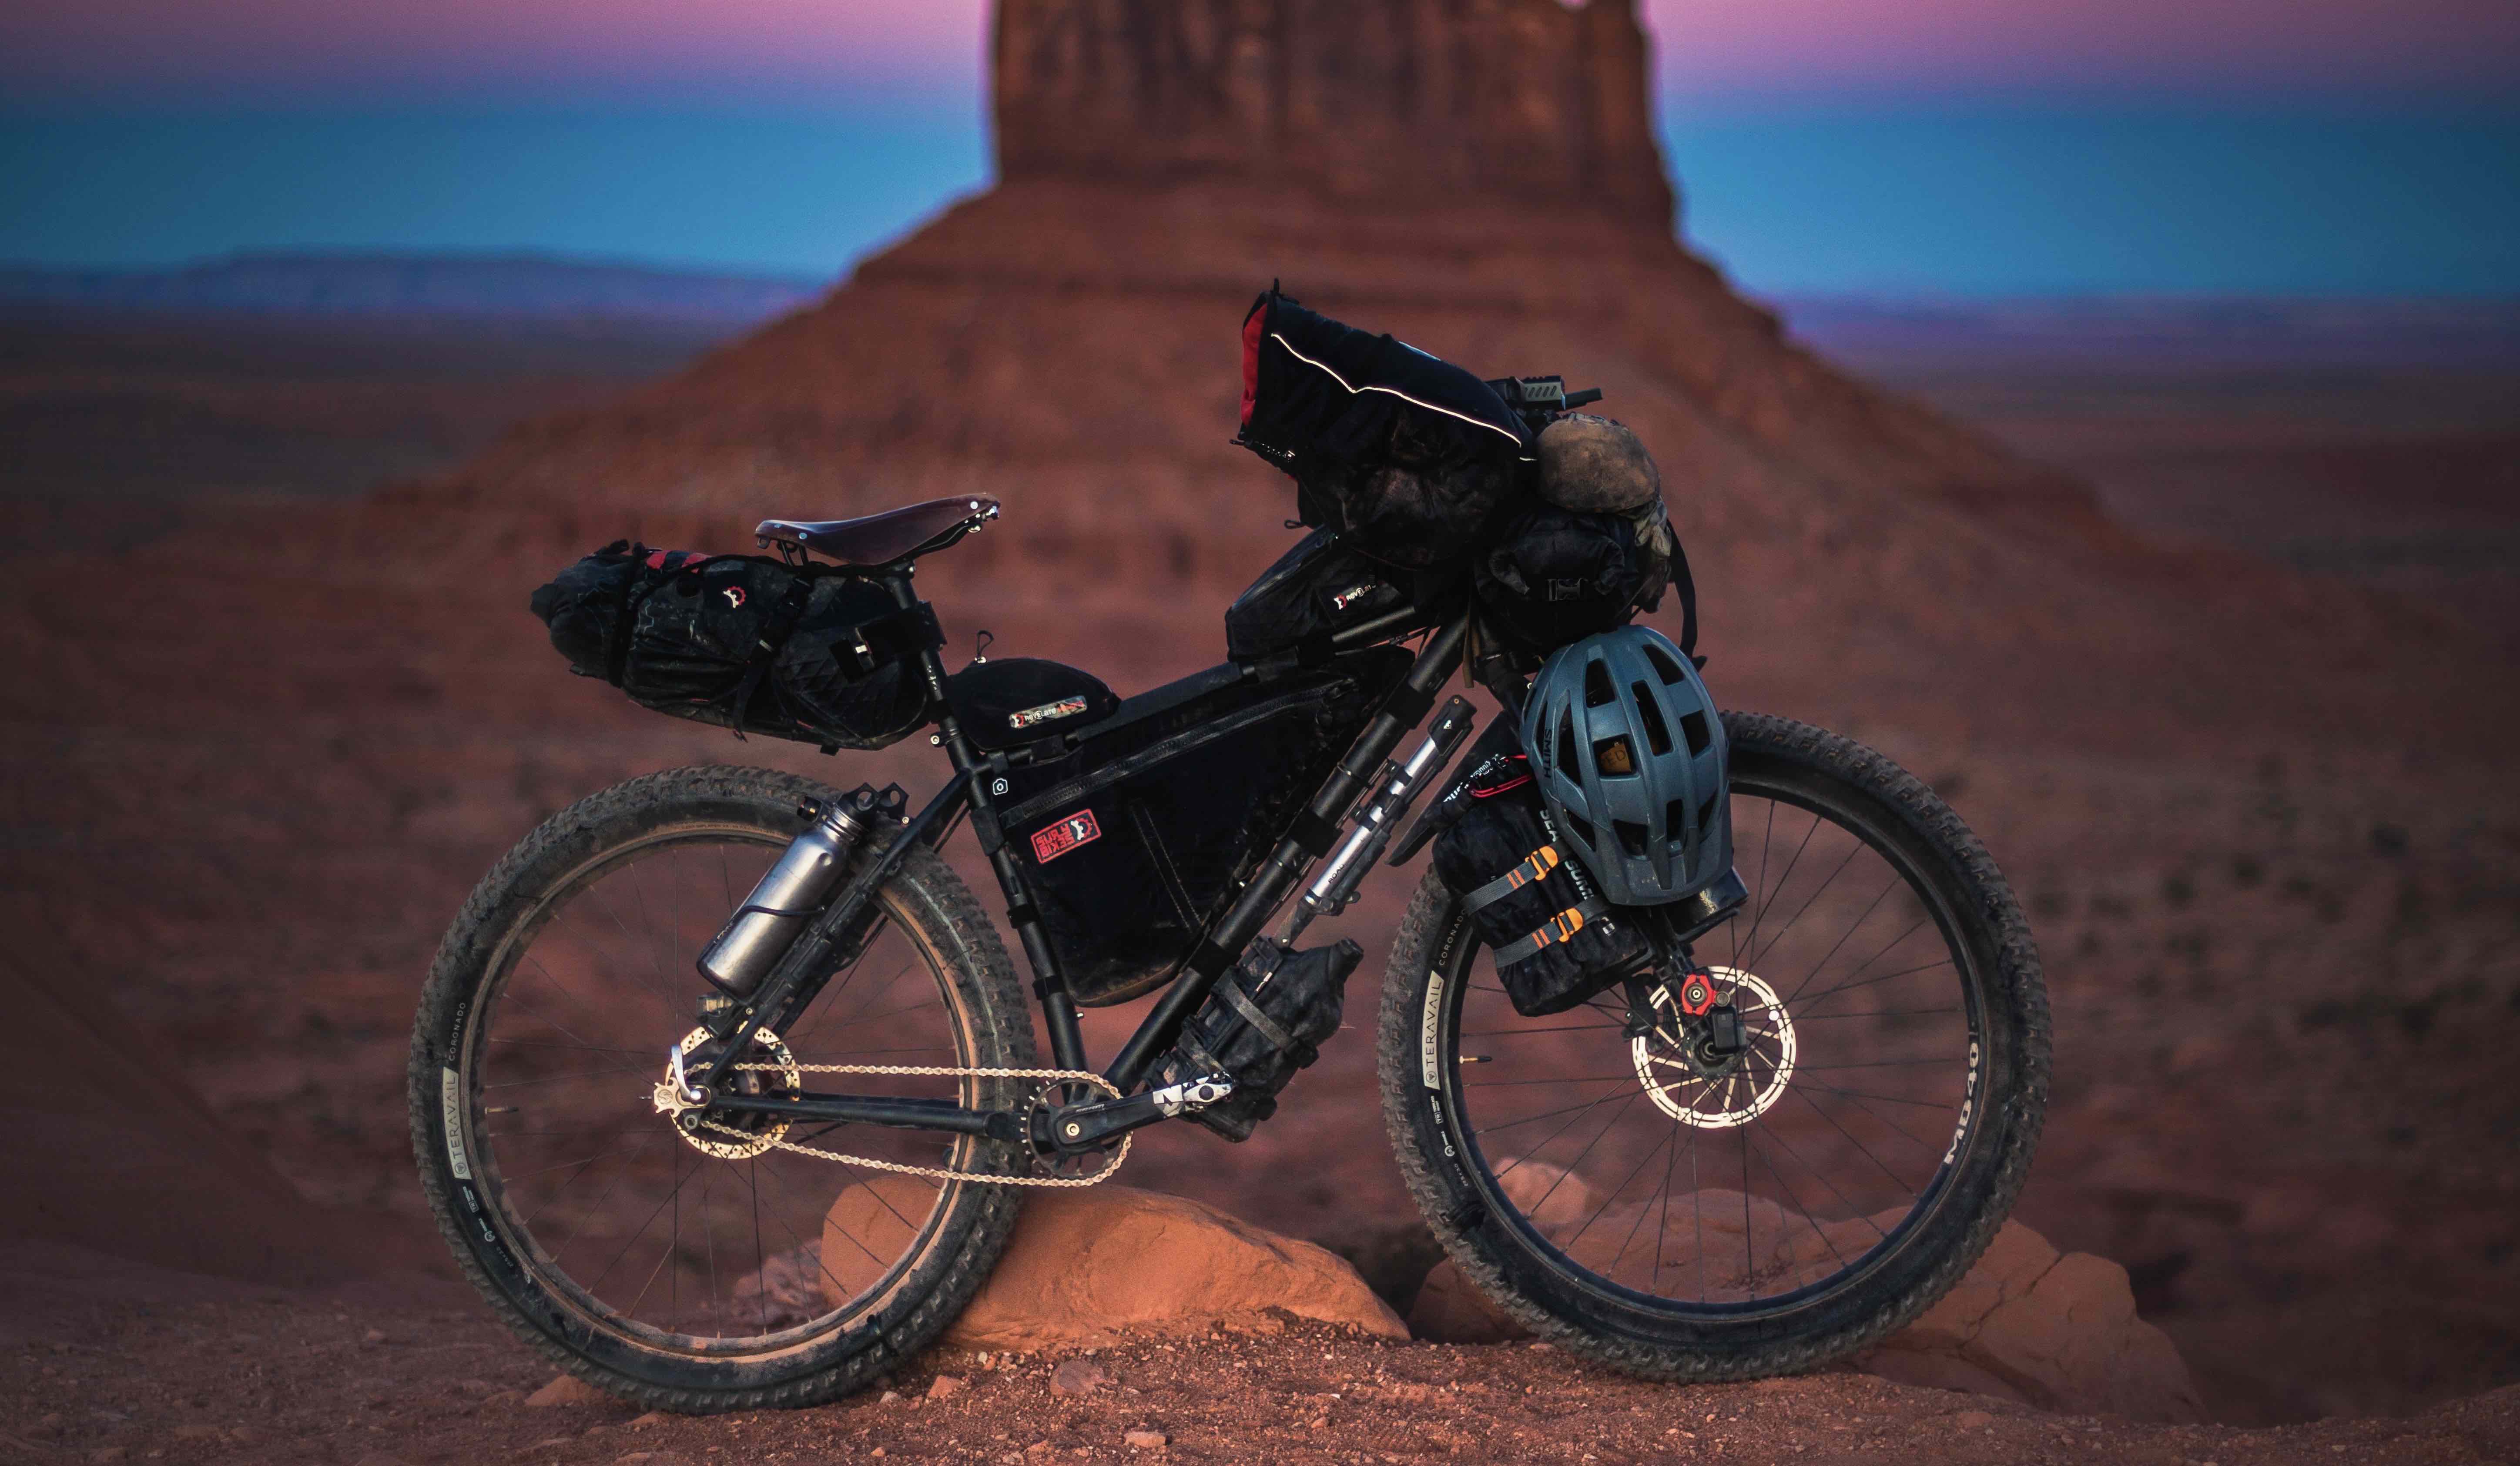 Bike loaded with packing gear, with desert background